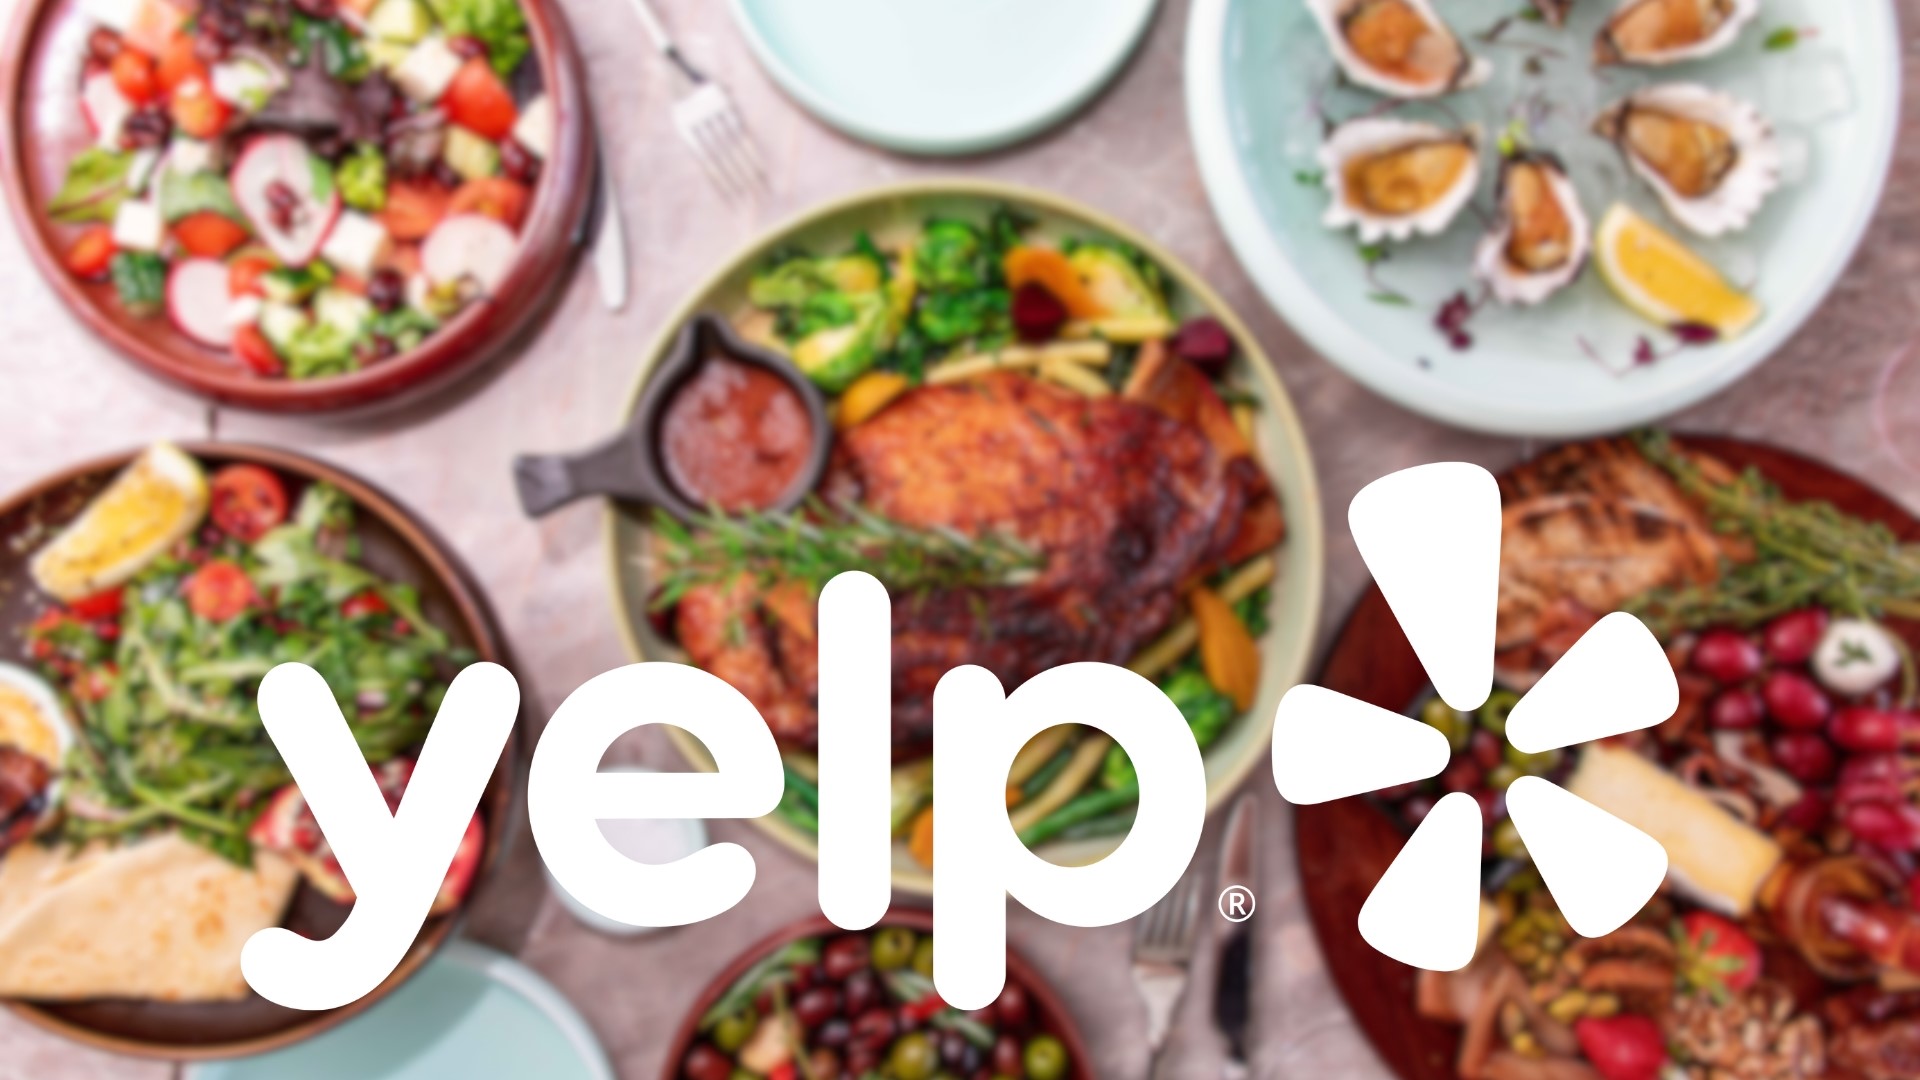 Every year, Yelp analyzes millions of reviews and suggestions from its community of users to name the best local eateries for its Top 100 Places to Eat list.